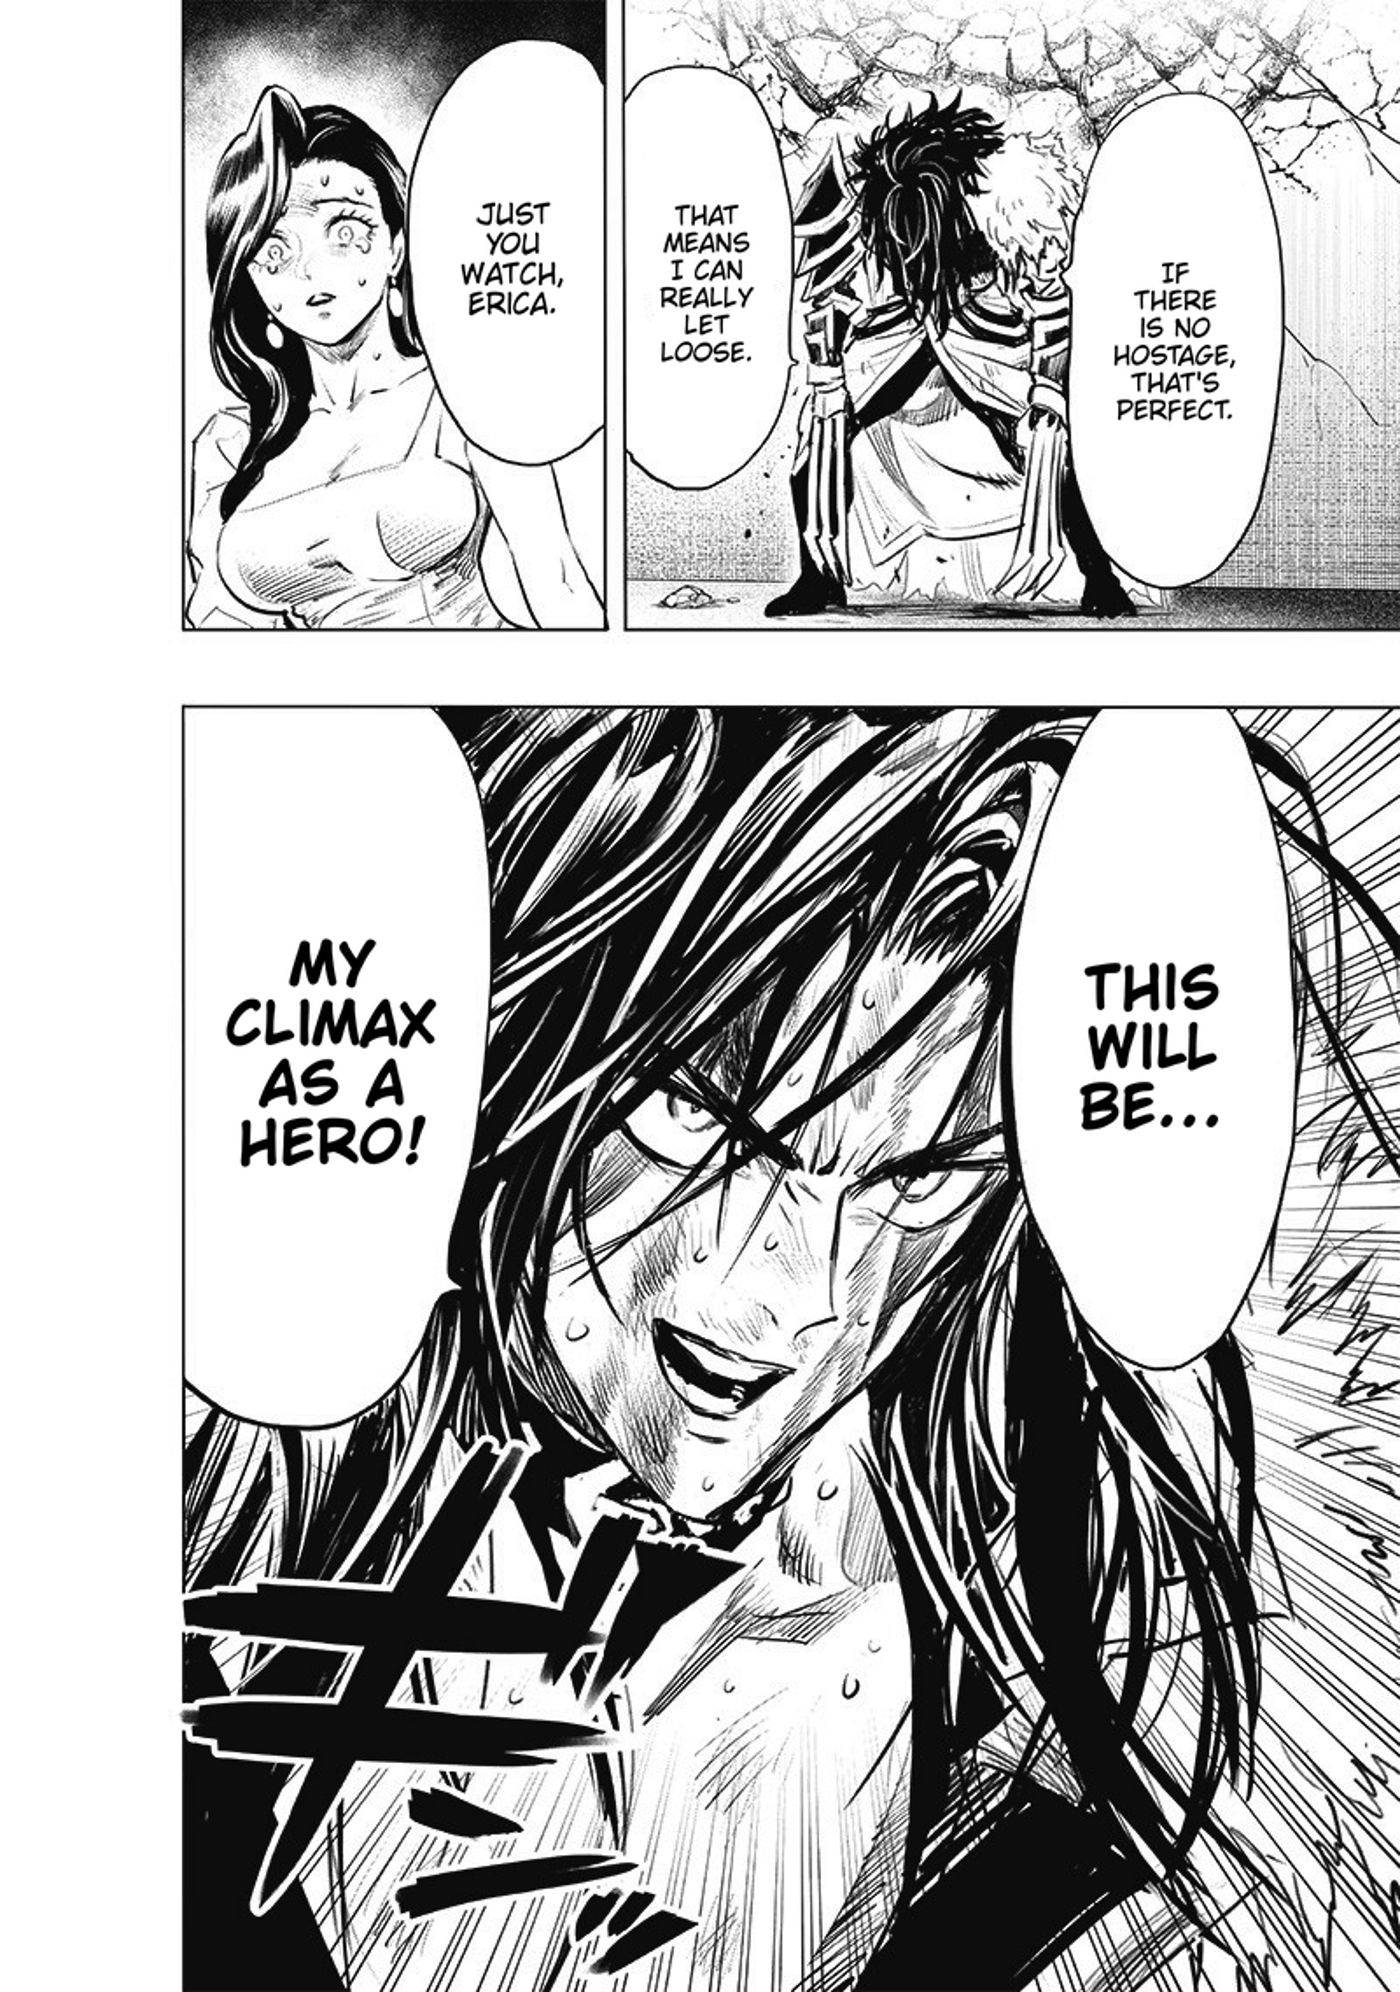 Feather declares his hero climax in one-punch man